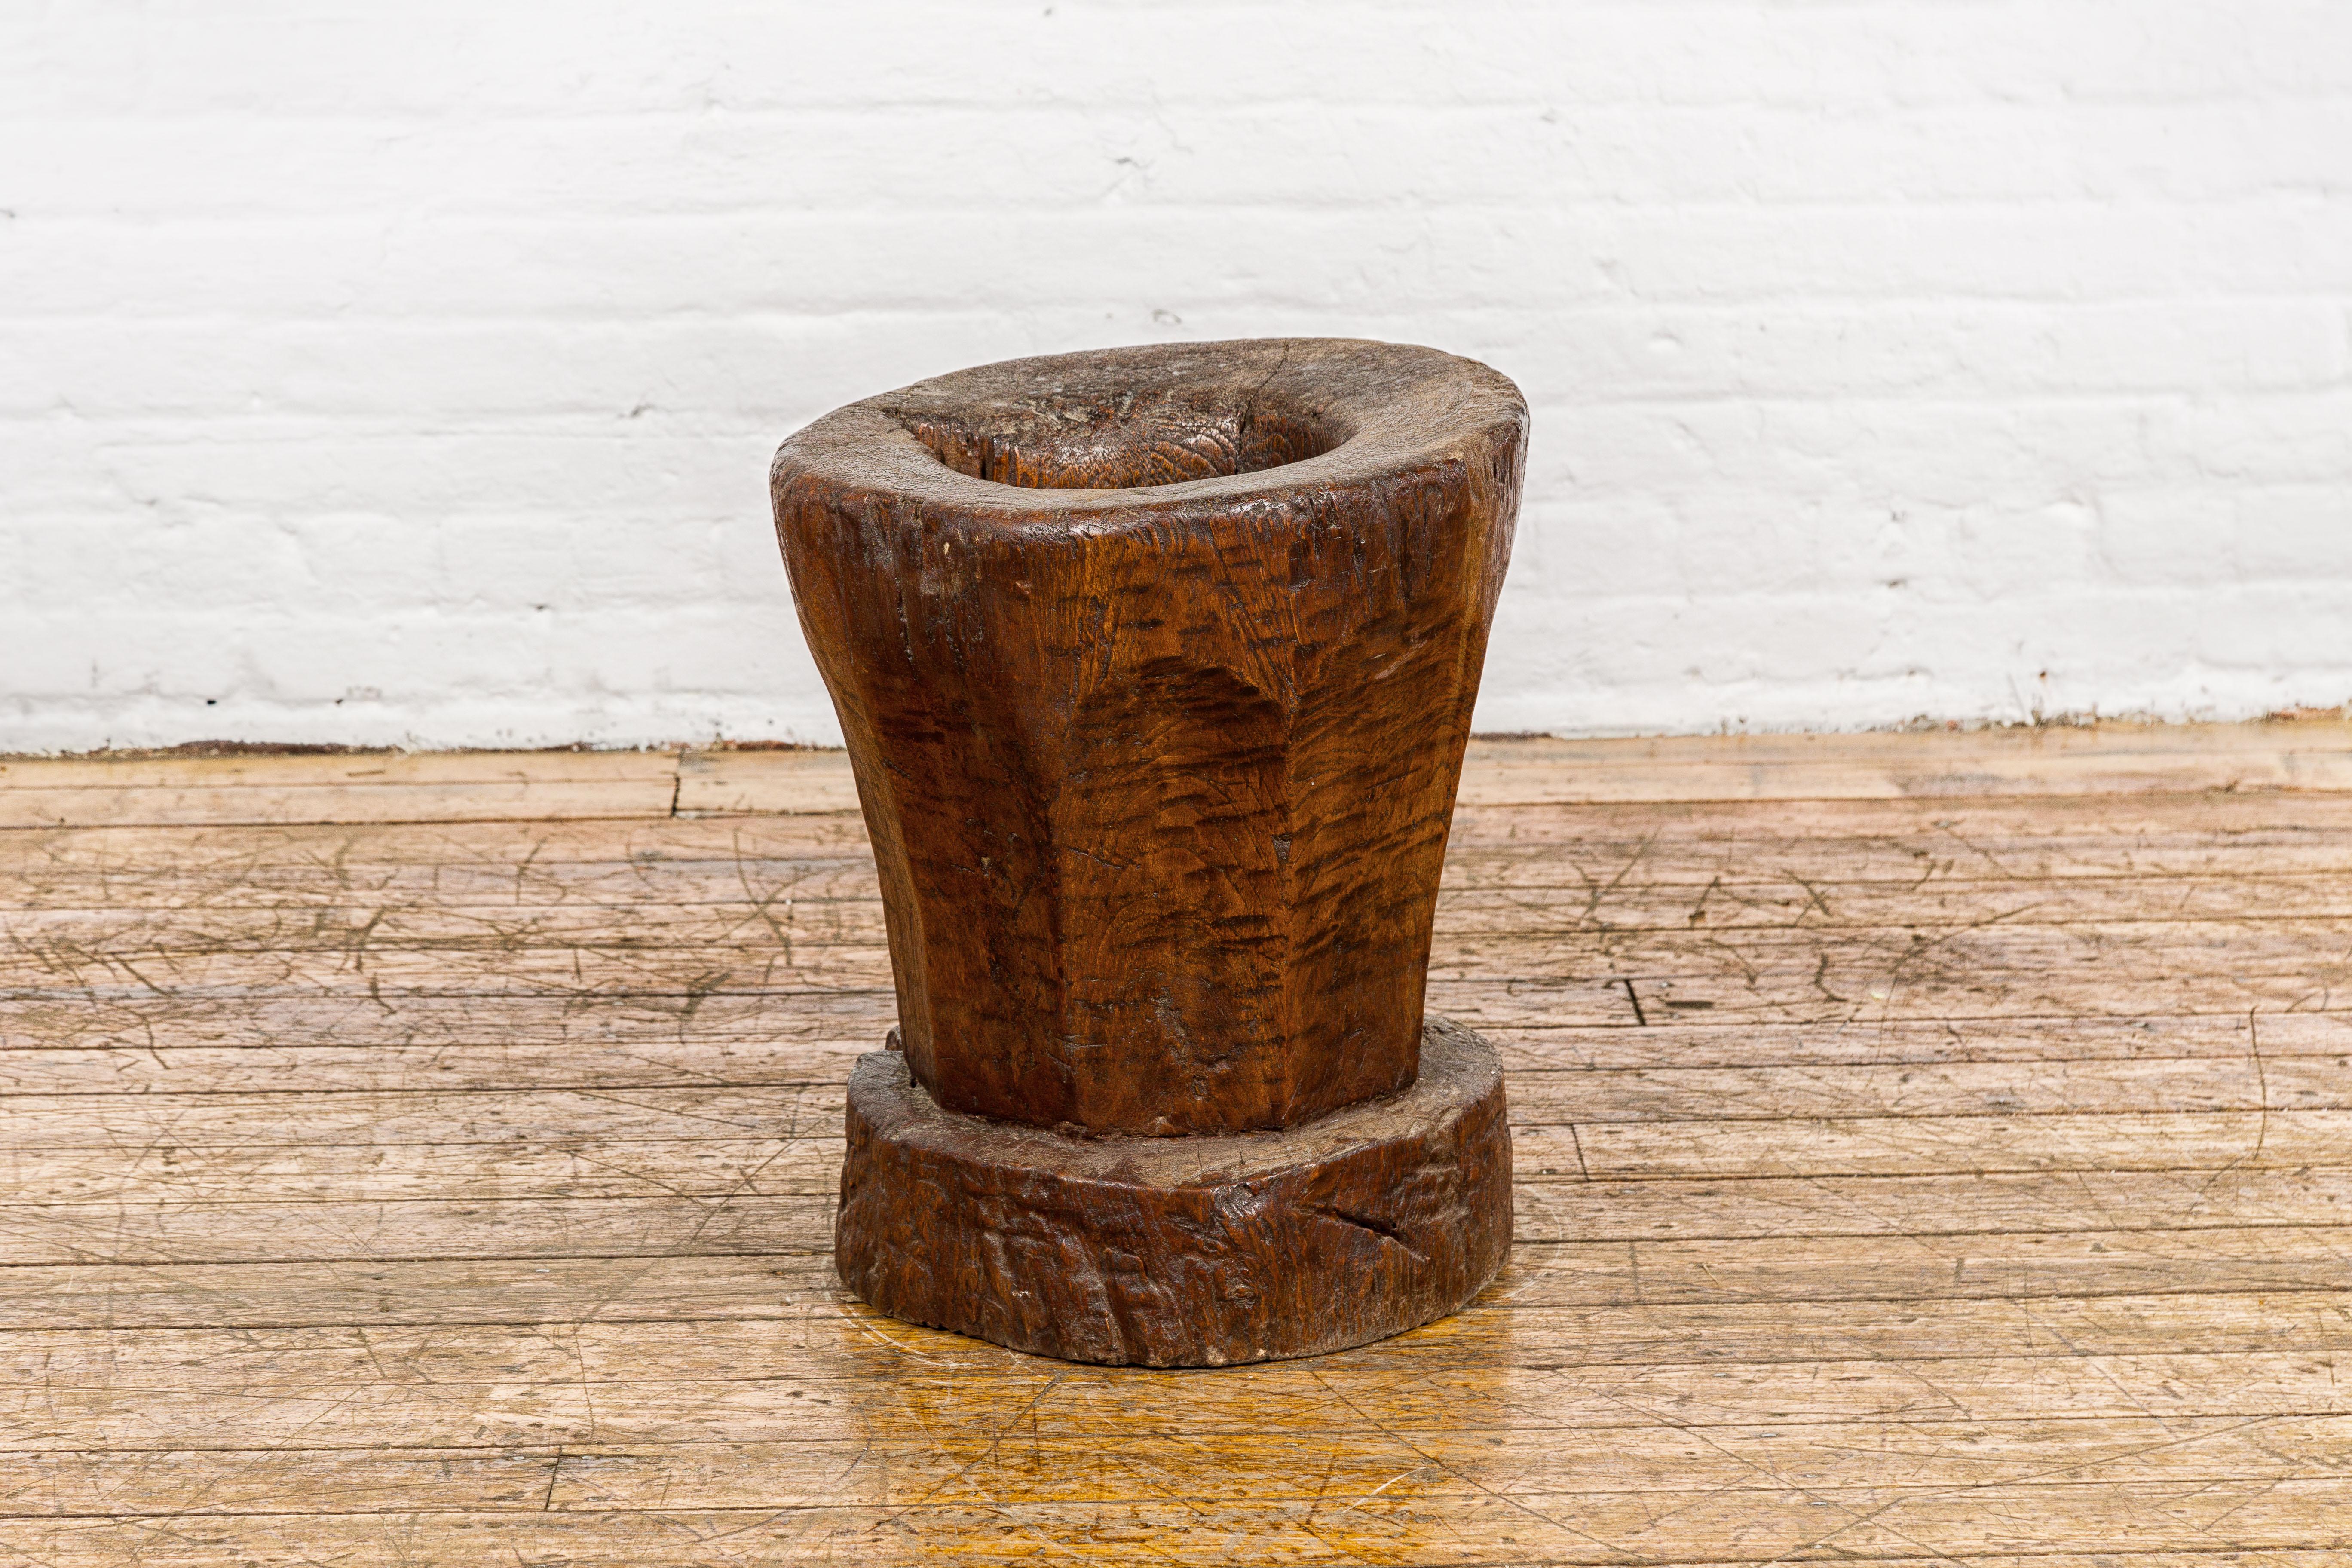 Indonesian Teak Wood Rustic Mortar Urn Repurposed as an Antique Planter, 19th Century For Sale